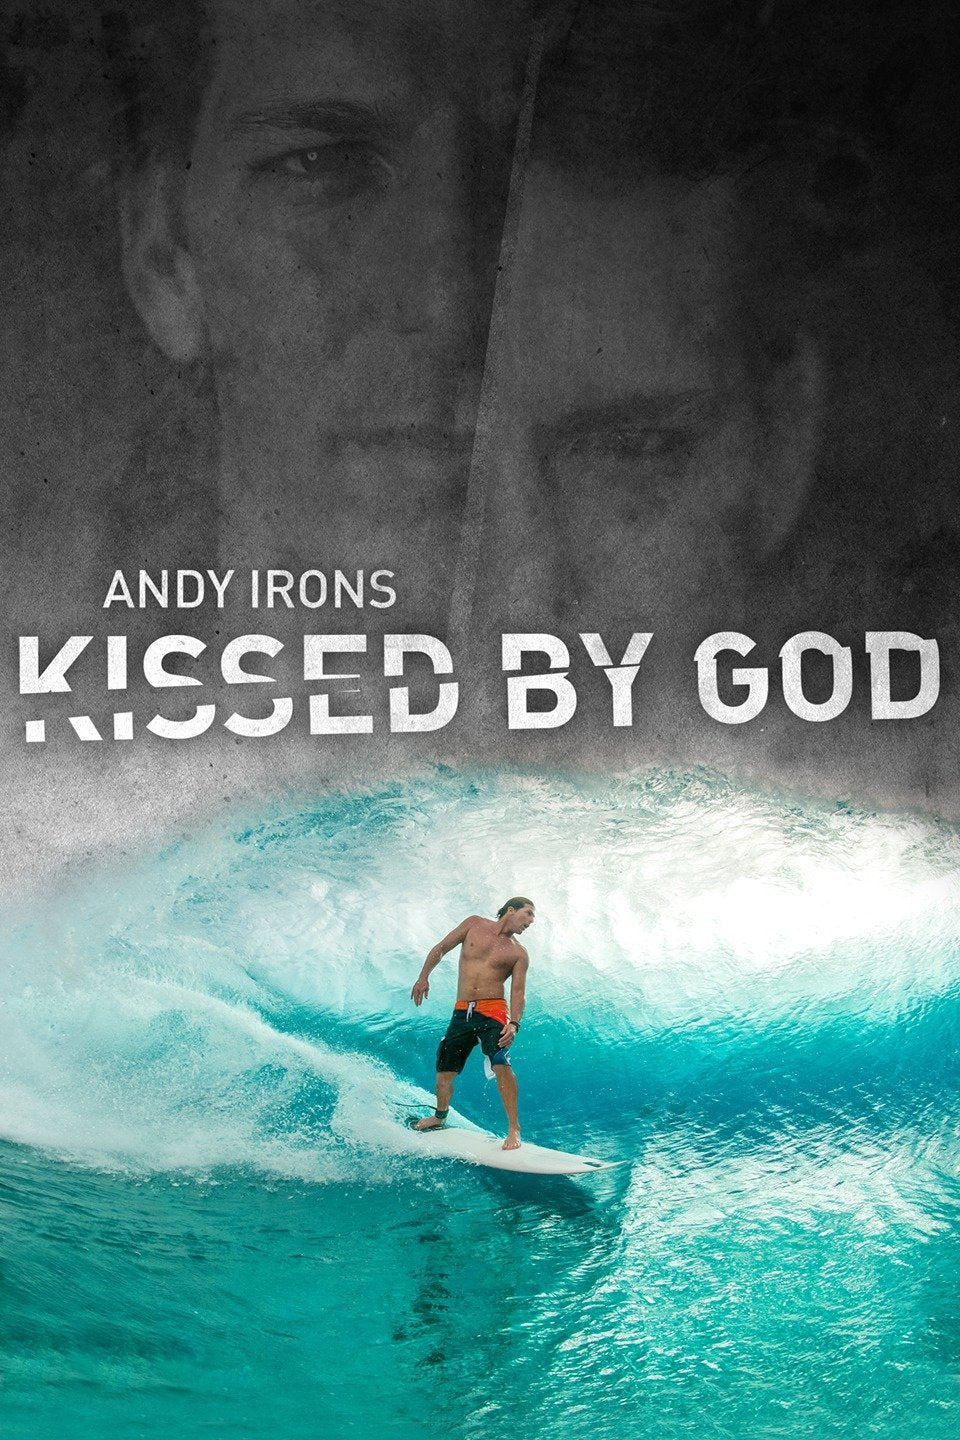 Andy Irons Kissed By God DVD - Teton Gravity Research